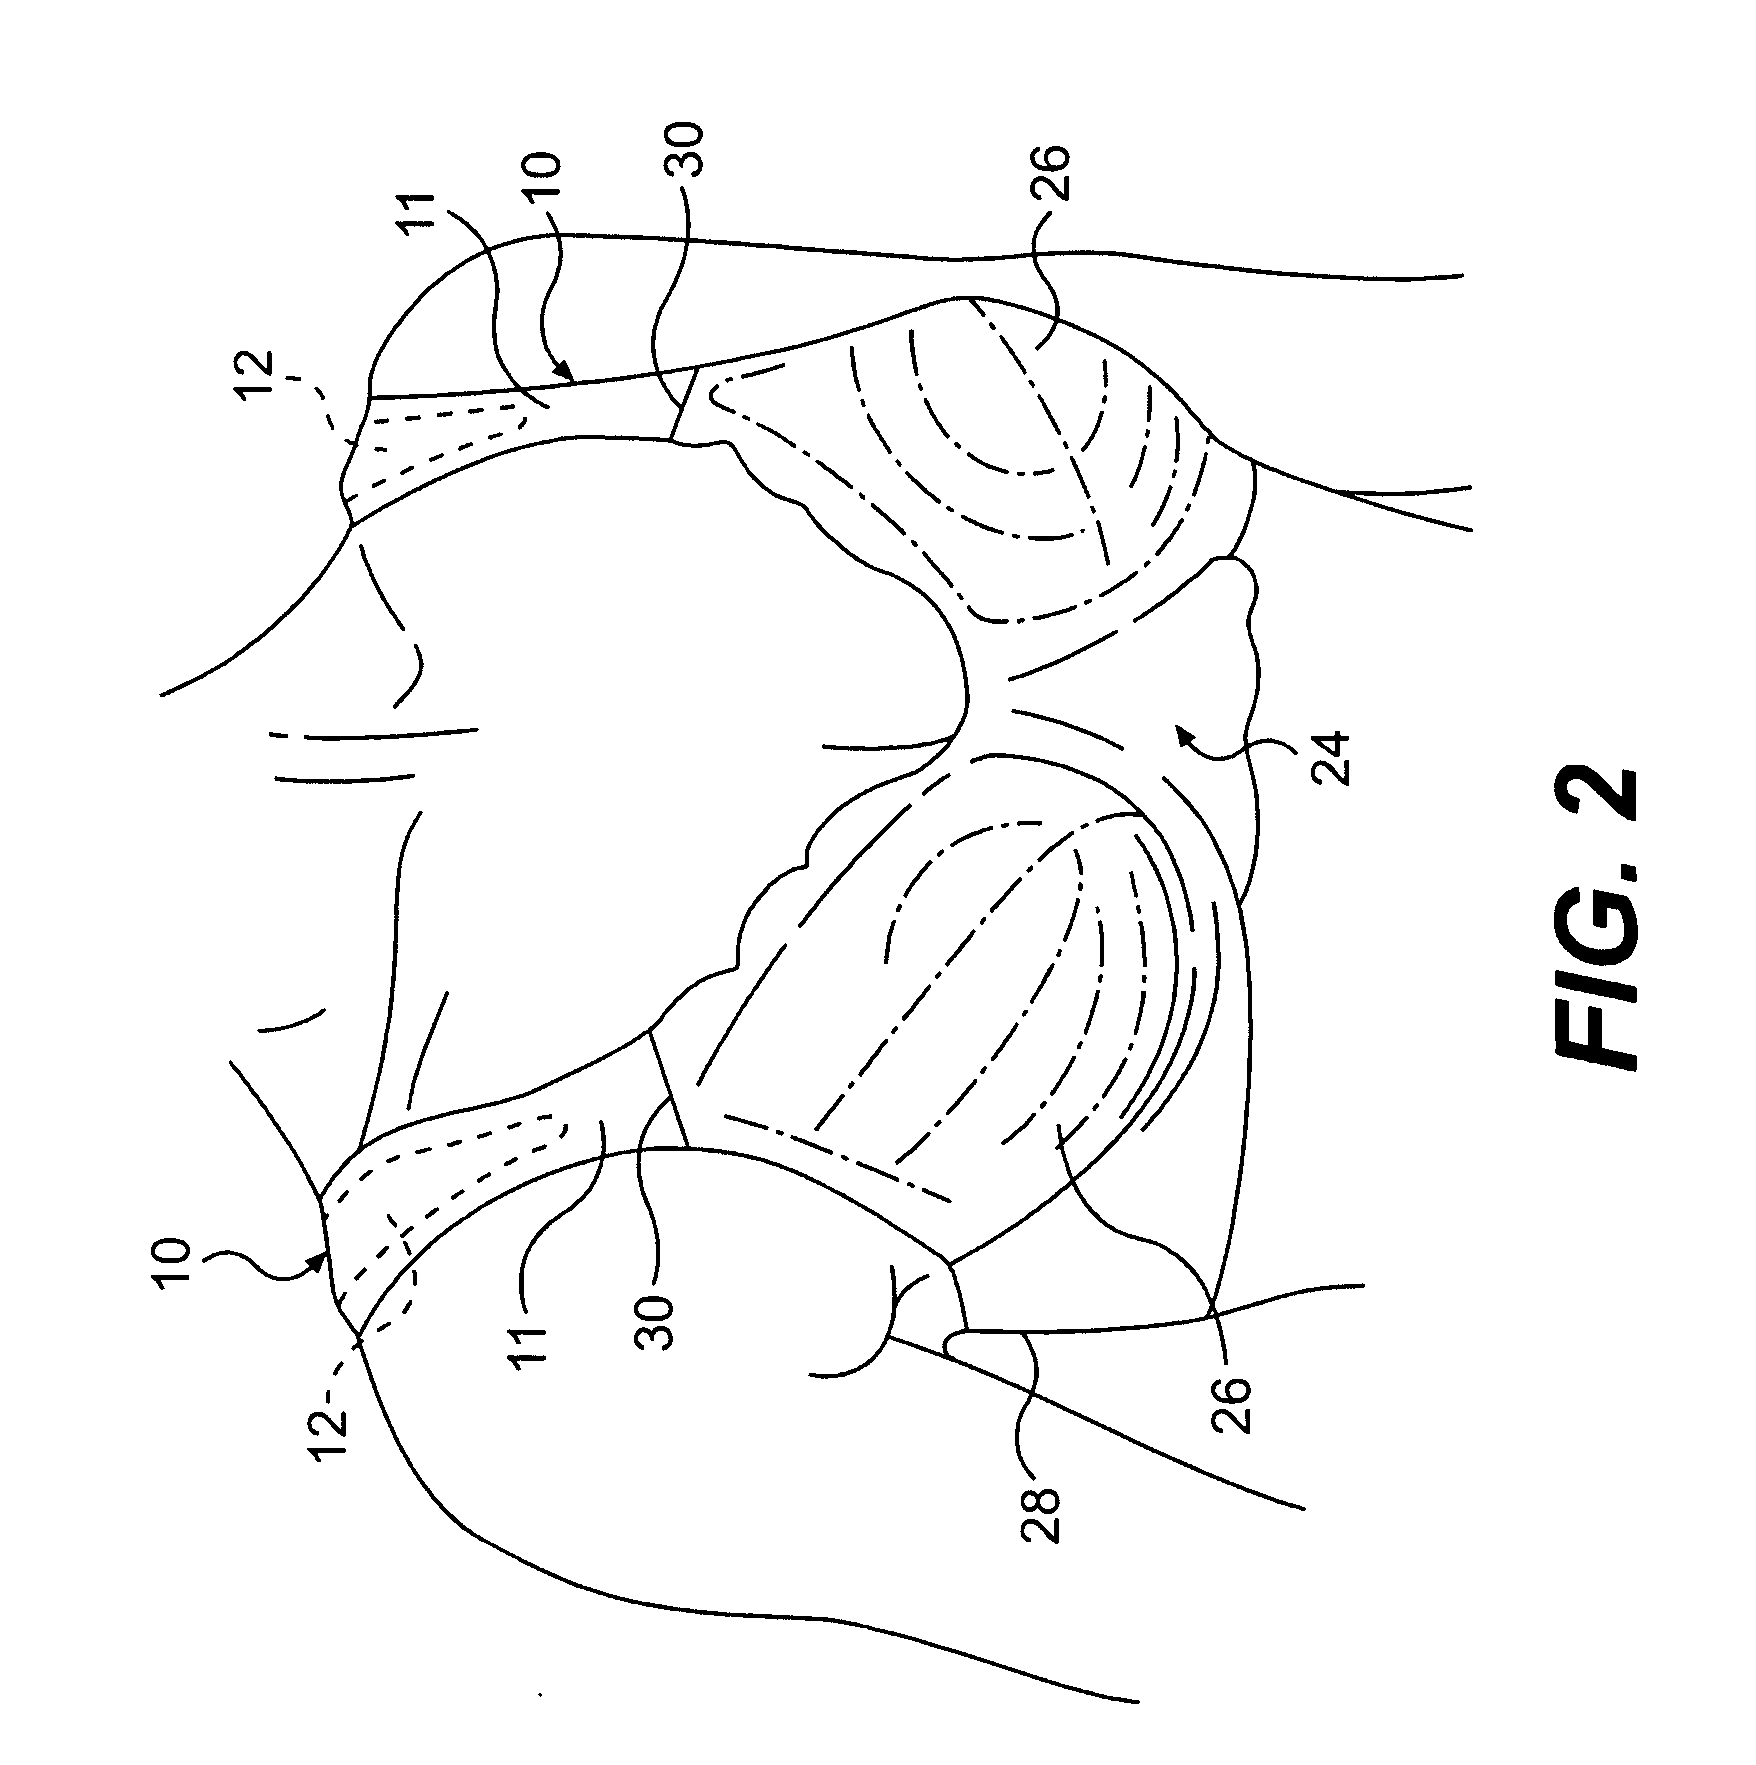 Cushioning laminate insert for a garment shoulder strap, and method for making the same